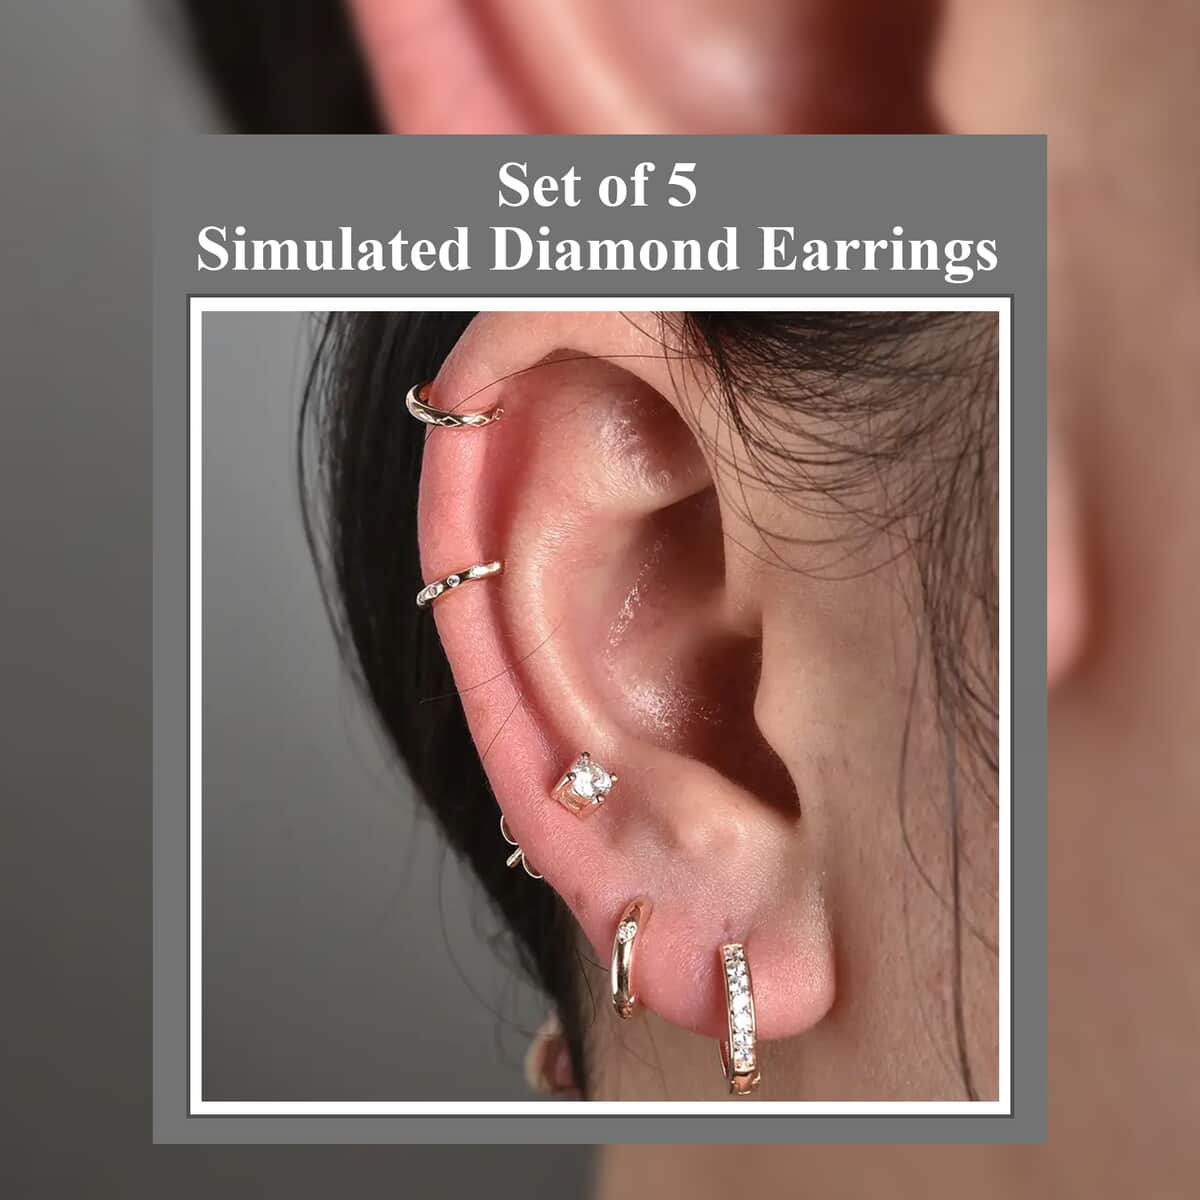 Set of 5 Simulated Diamond 1.40 ctw Earrings in 14K RG Over Sterling Silver, Simulated Diamond Solitaire Studs, Tribal Pattern Earrings, Plain Ear Cuffs, Simulated Diamond Studs image number 1